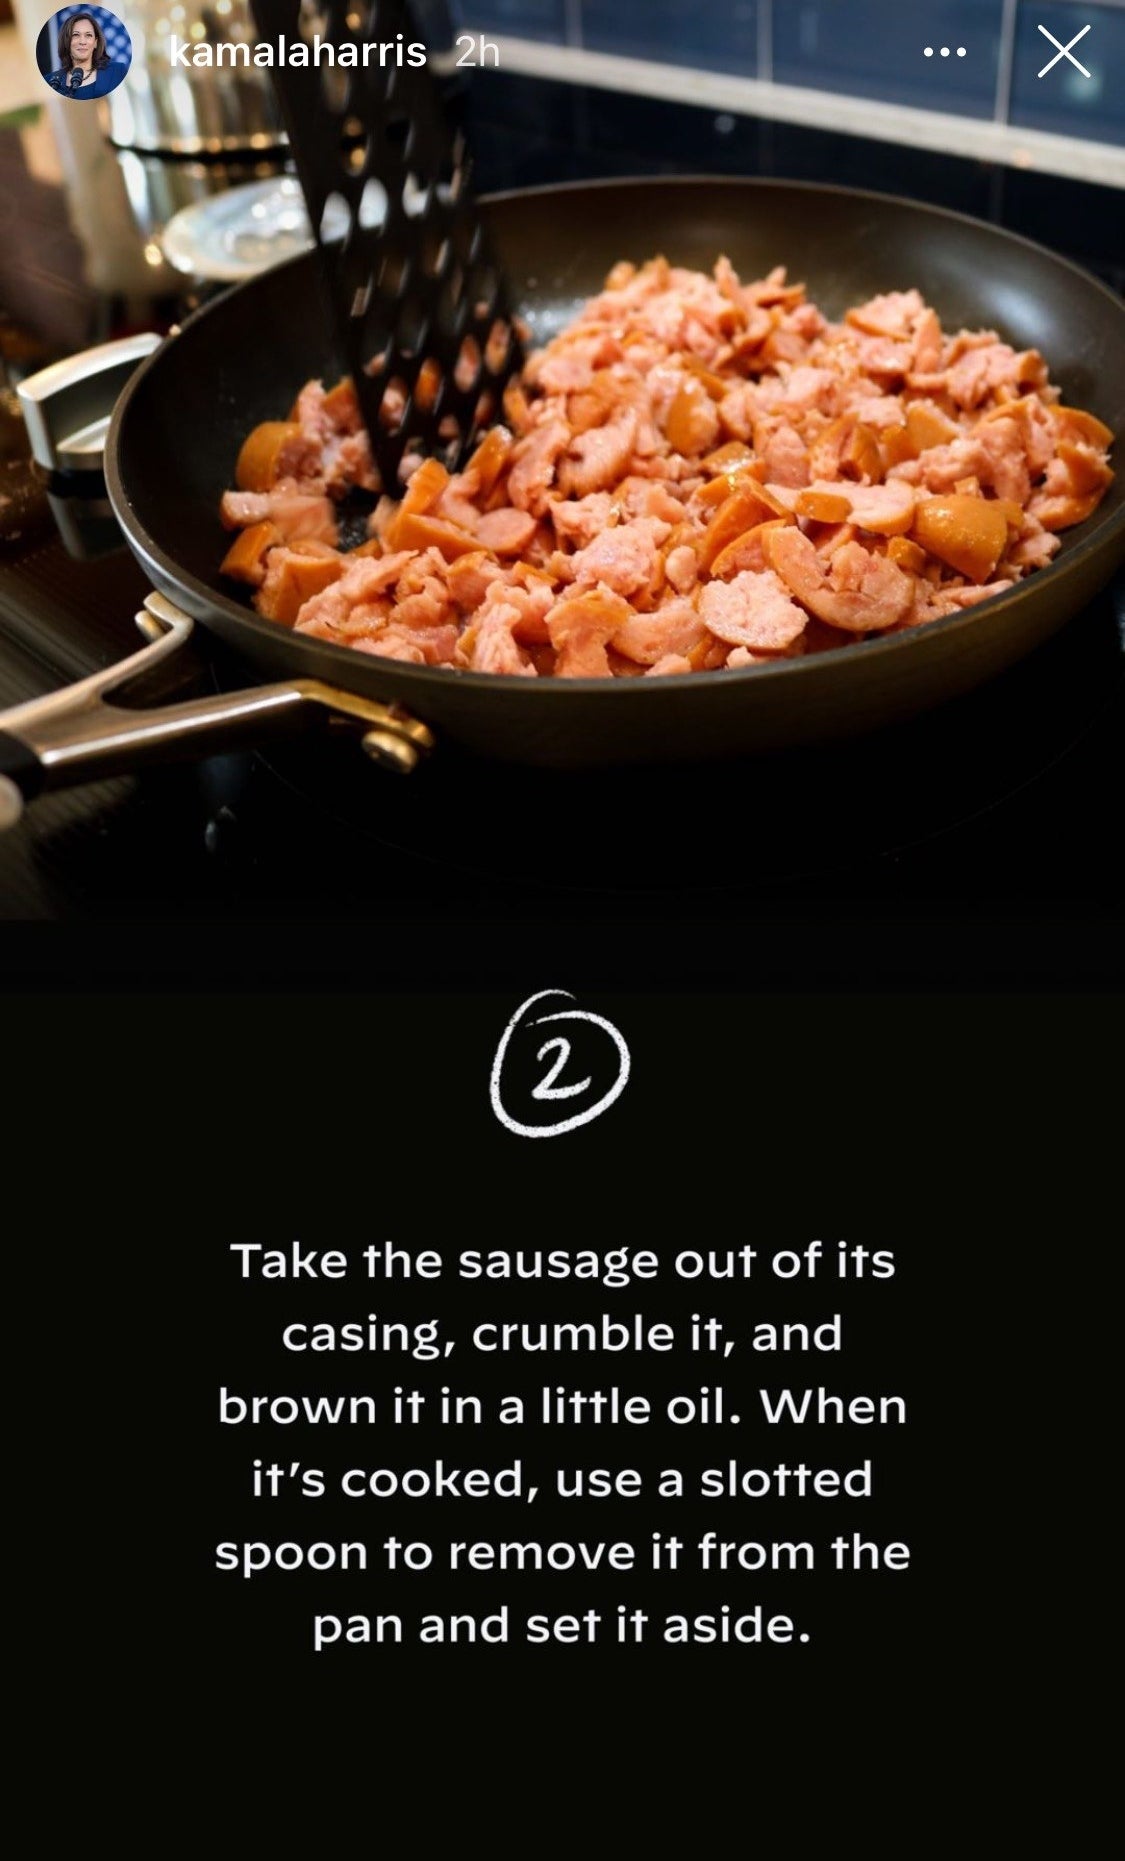 Sausage being sautéd in a pan on the stove